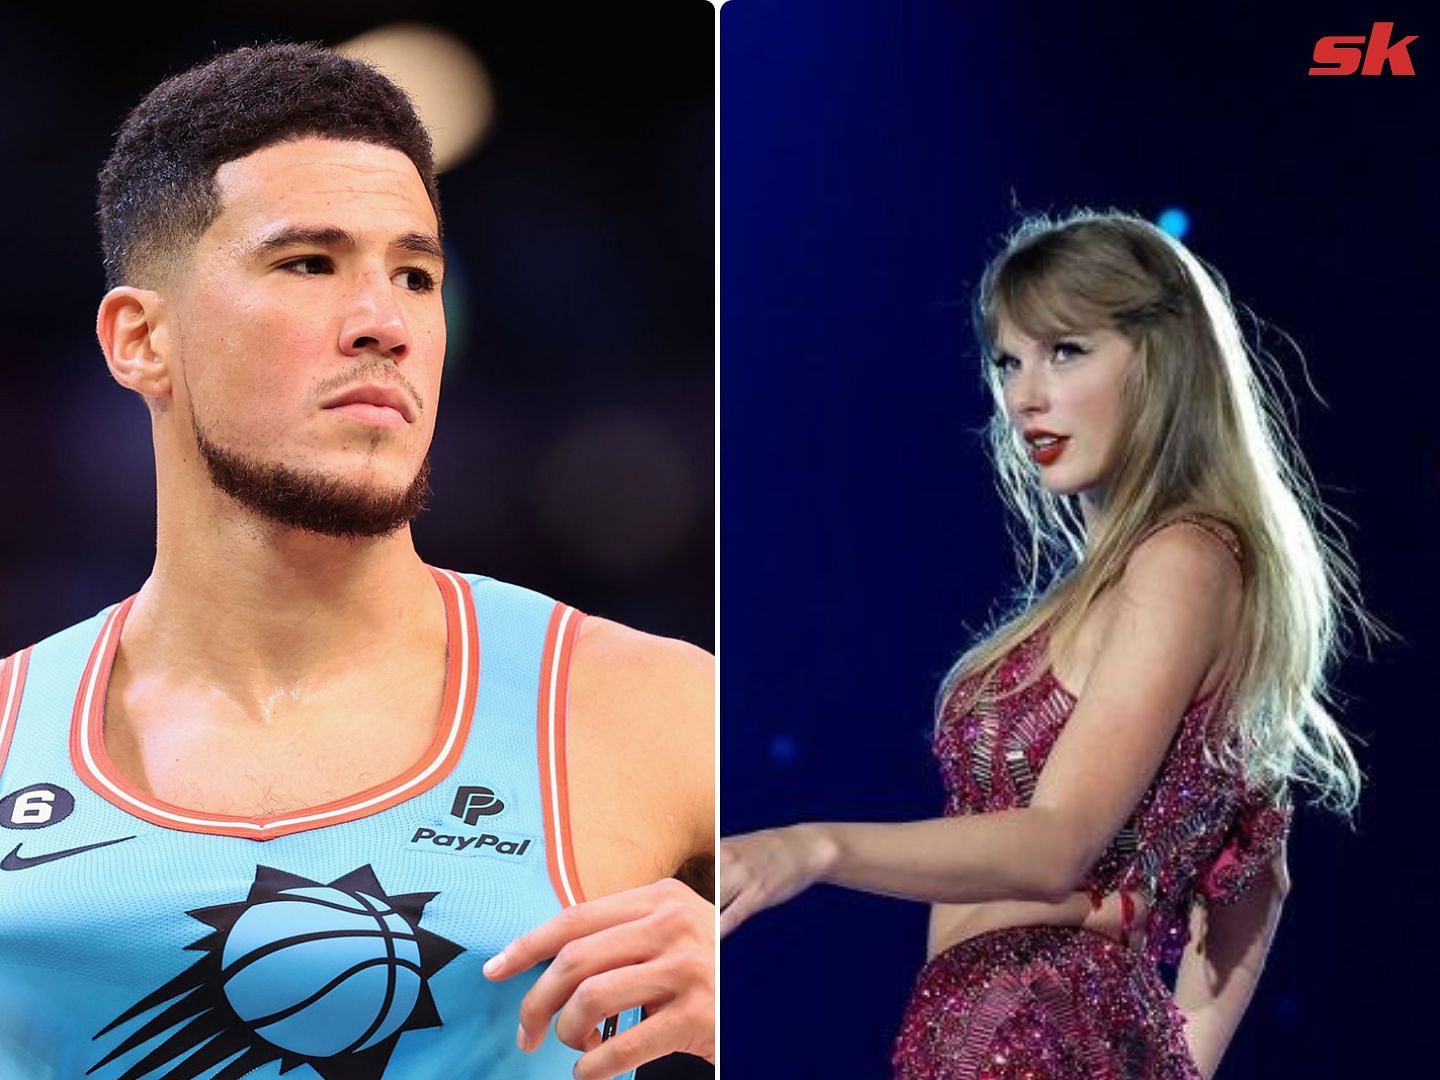 Fact Check: Is Devin Booker dating Taylor Swift?